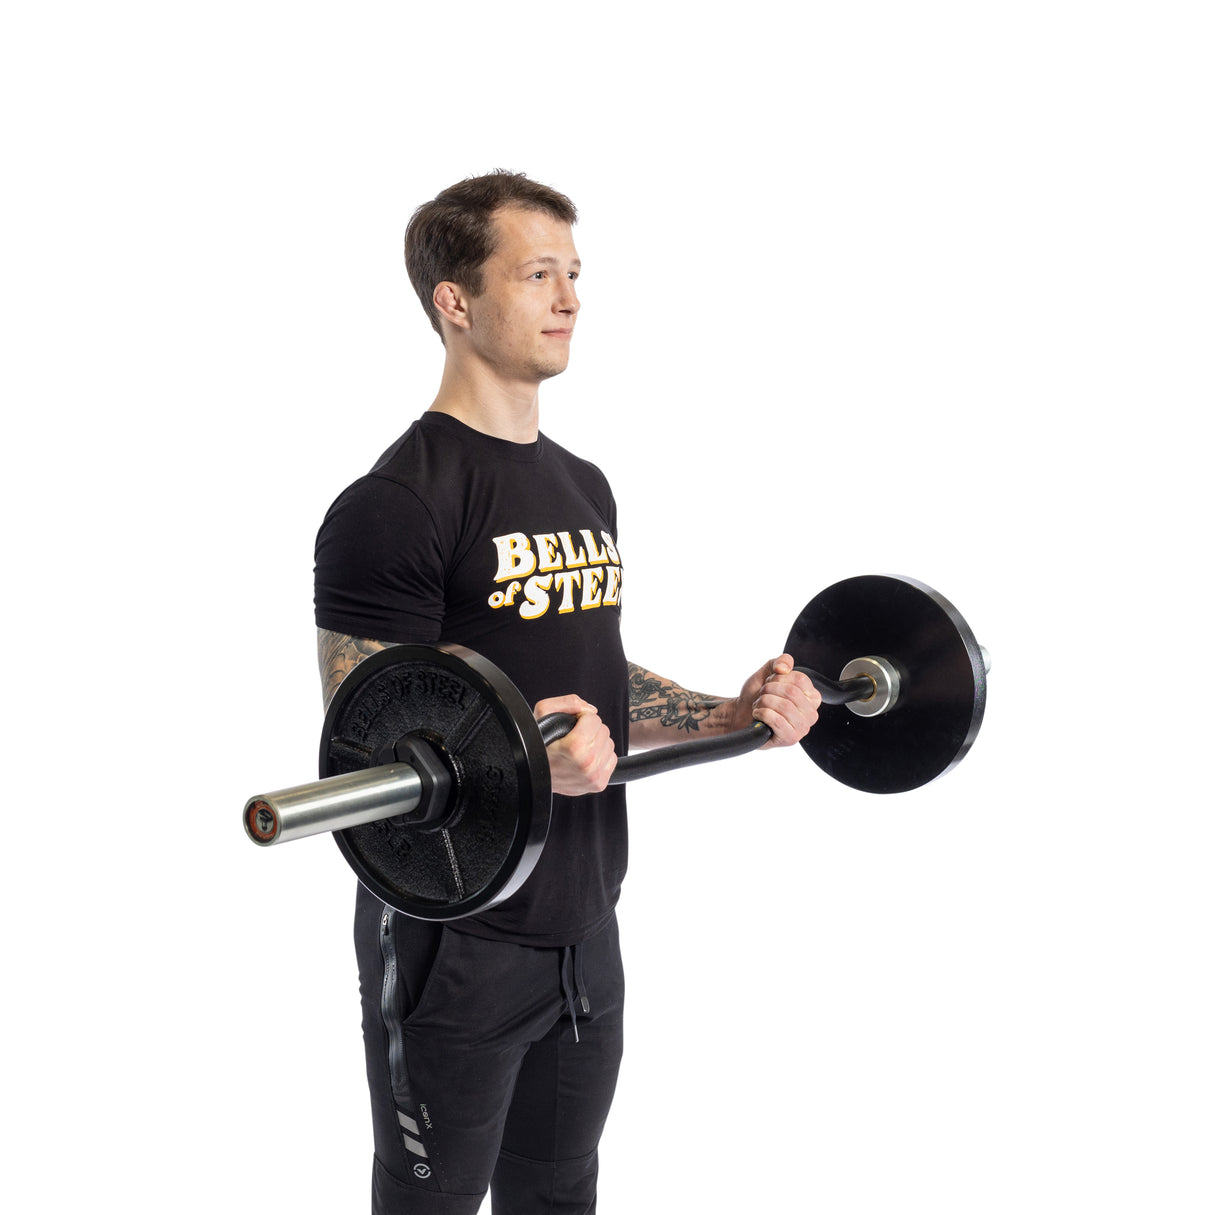 Man exercising with a 54.5" EZ curl bar, targeting his arms.